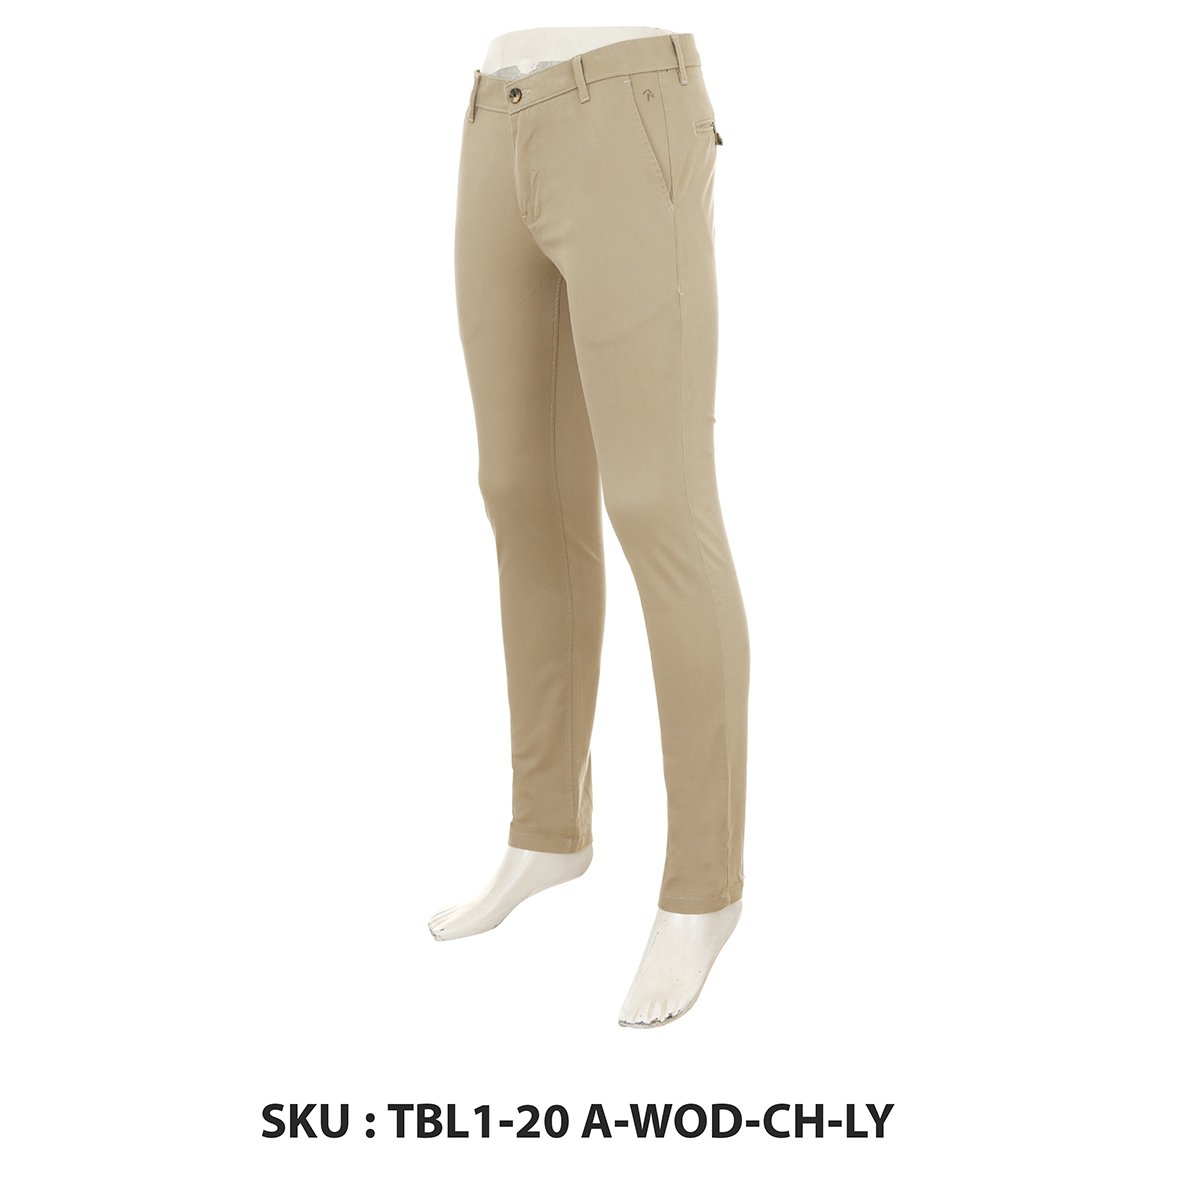 Classic Polo Mens Trousers Tbl1-20 A-Wod-Ch-Ly Wood 30